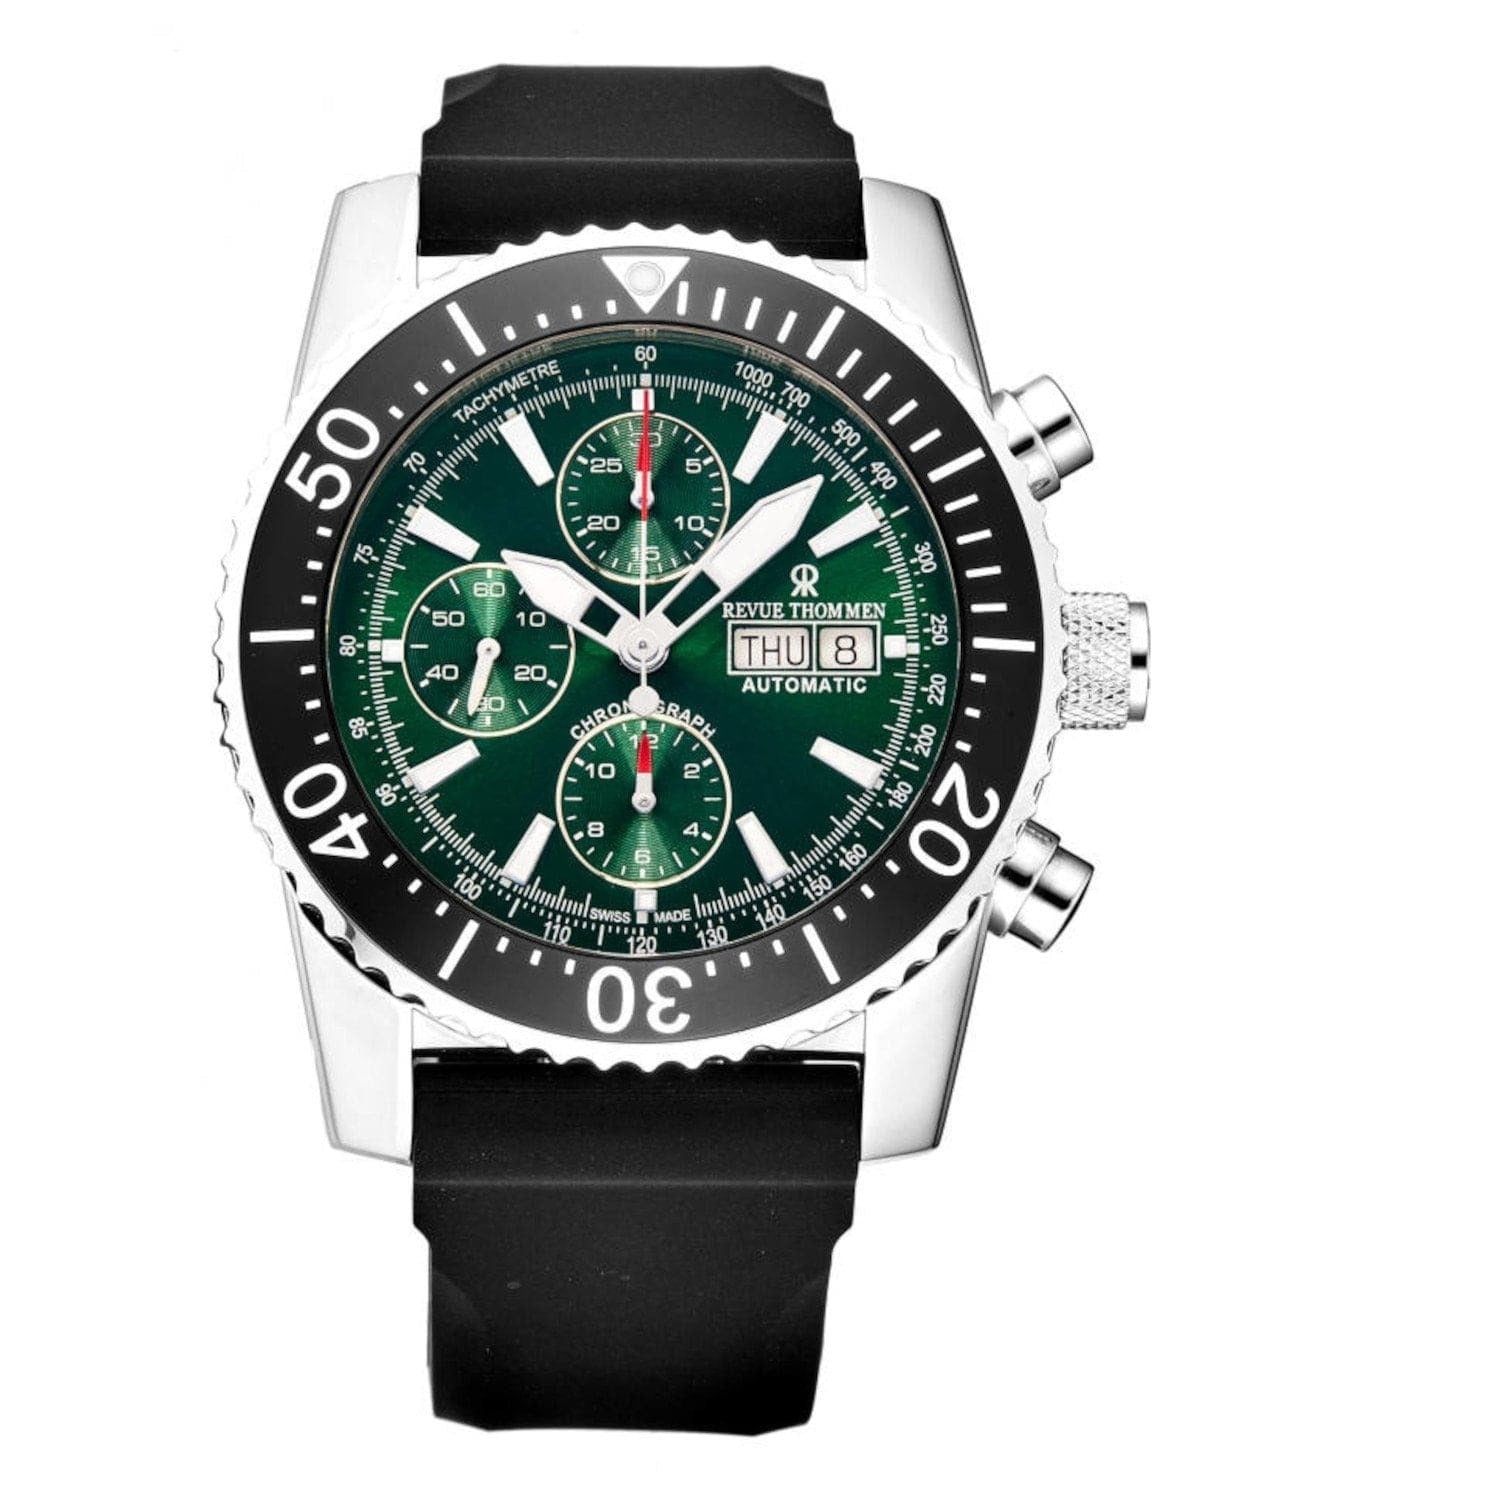 The Revue Thommen 17030.6522 Men's 'Air Speed' Green Dial Rubber Strap Chronograph Automatic Watch features a green dial and is set against a white background.